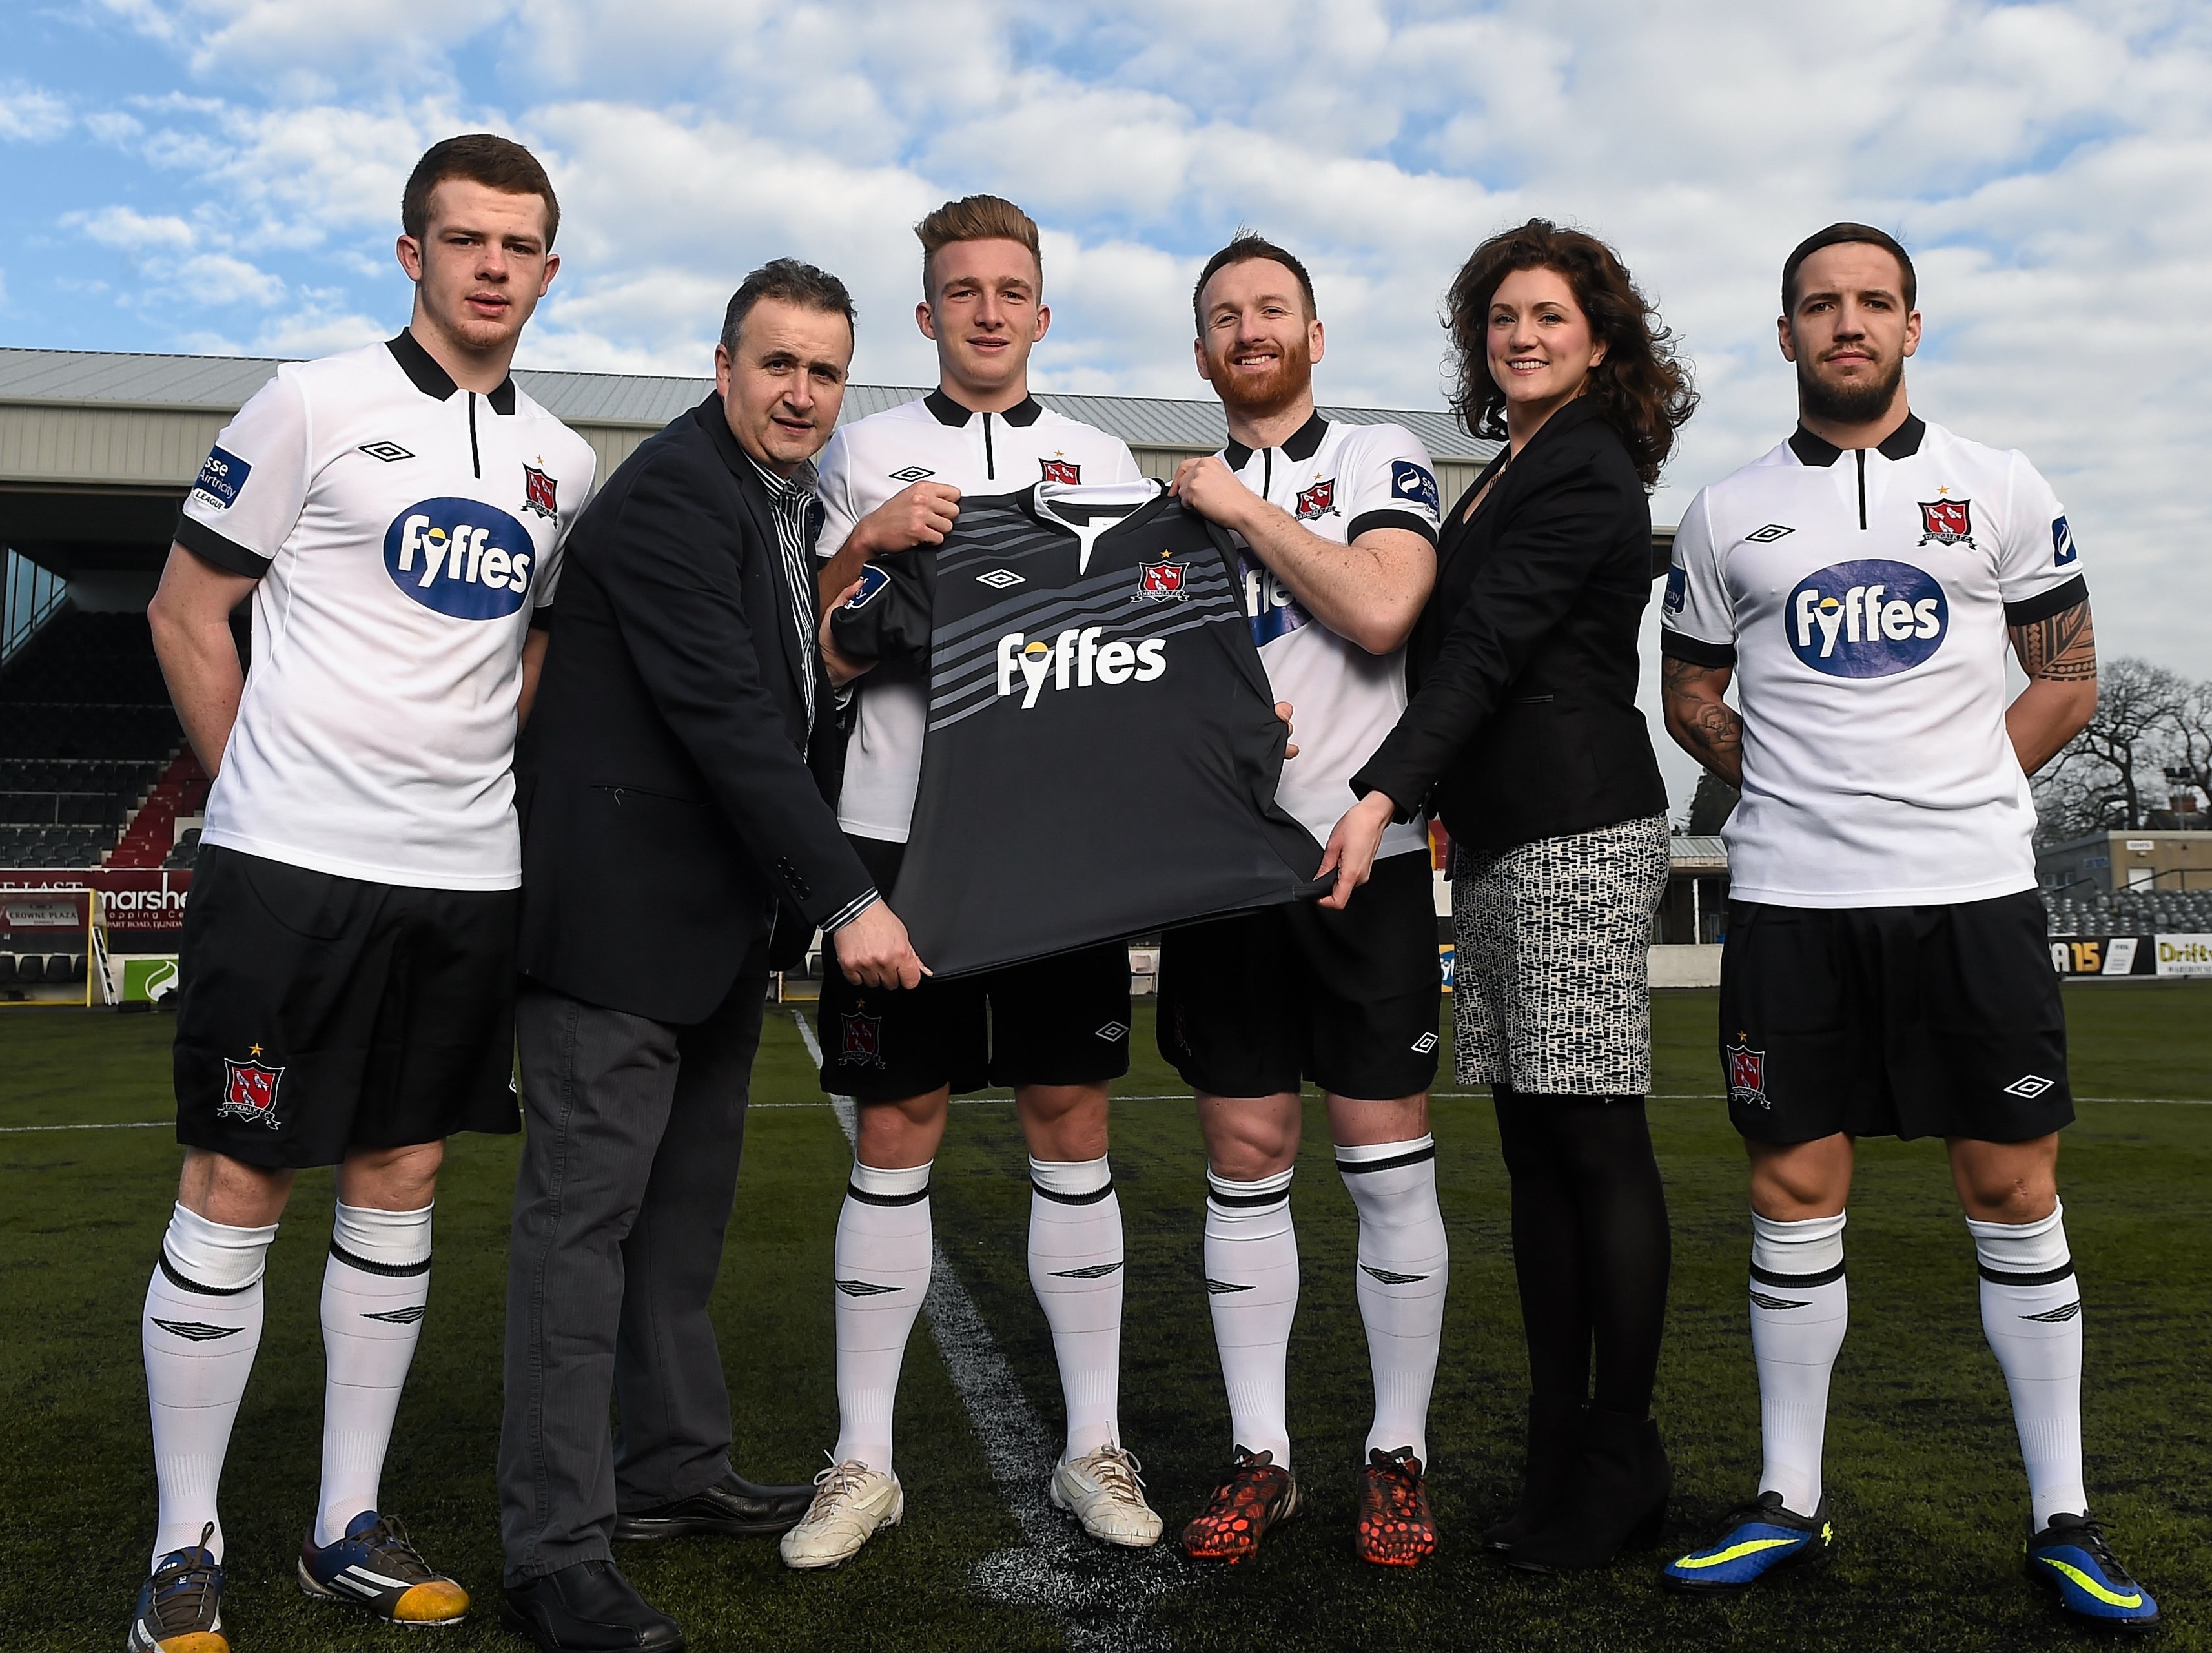 Dundalk VS Waterford ( BETTING TIPS, Match Preview & Expert Analysis )™